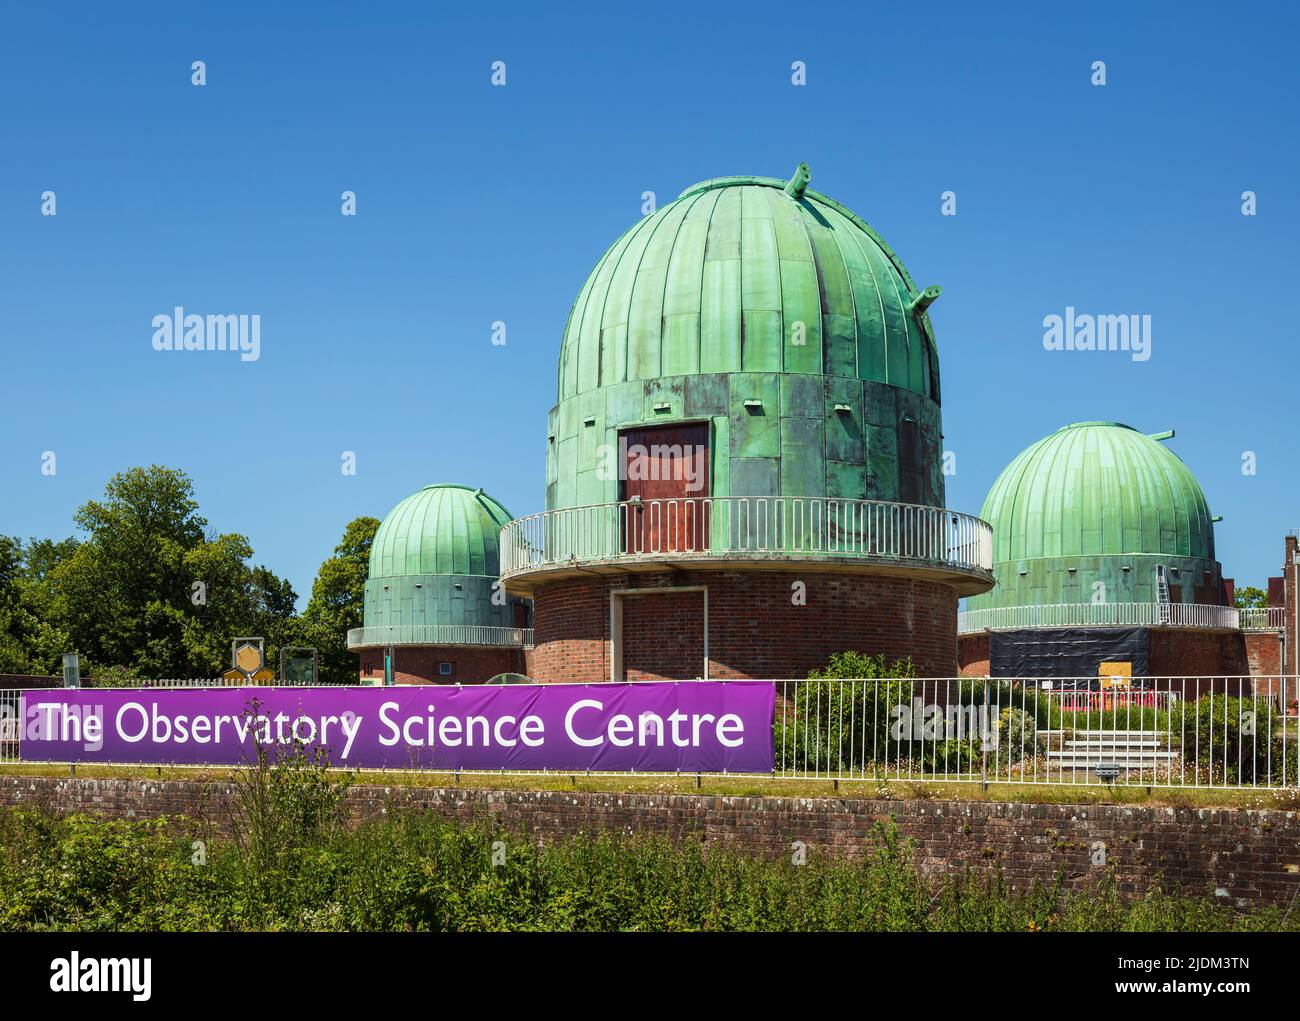 The Observatory Science Centre, Herstmonceux, East Sussex, Inghilterra, Regno Unito. Foto Stock